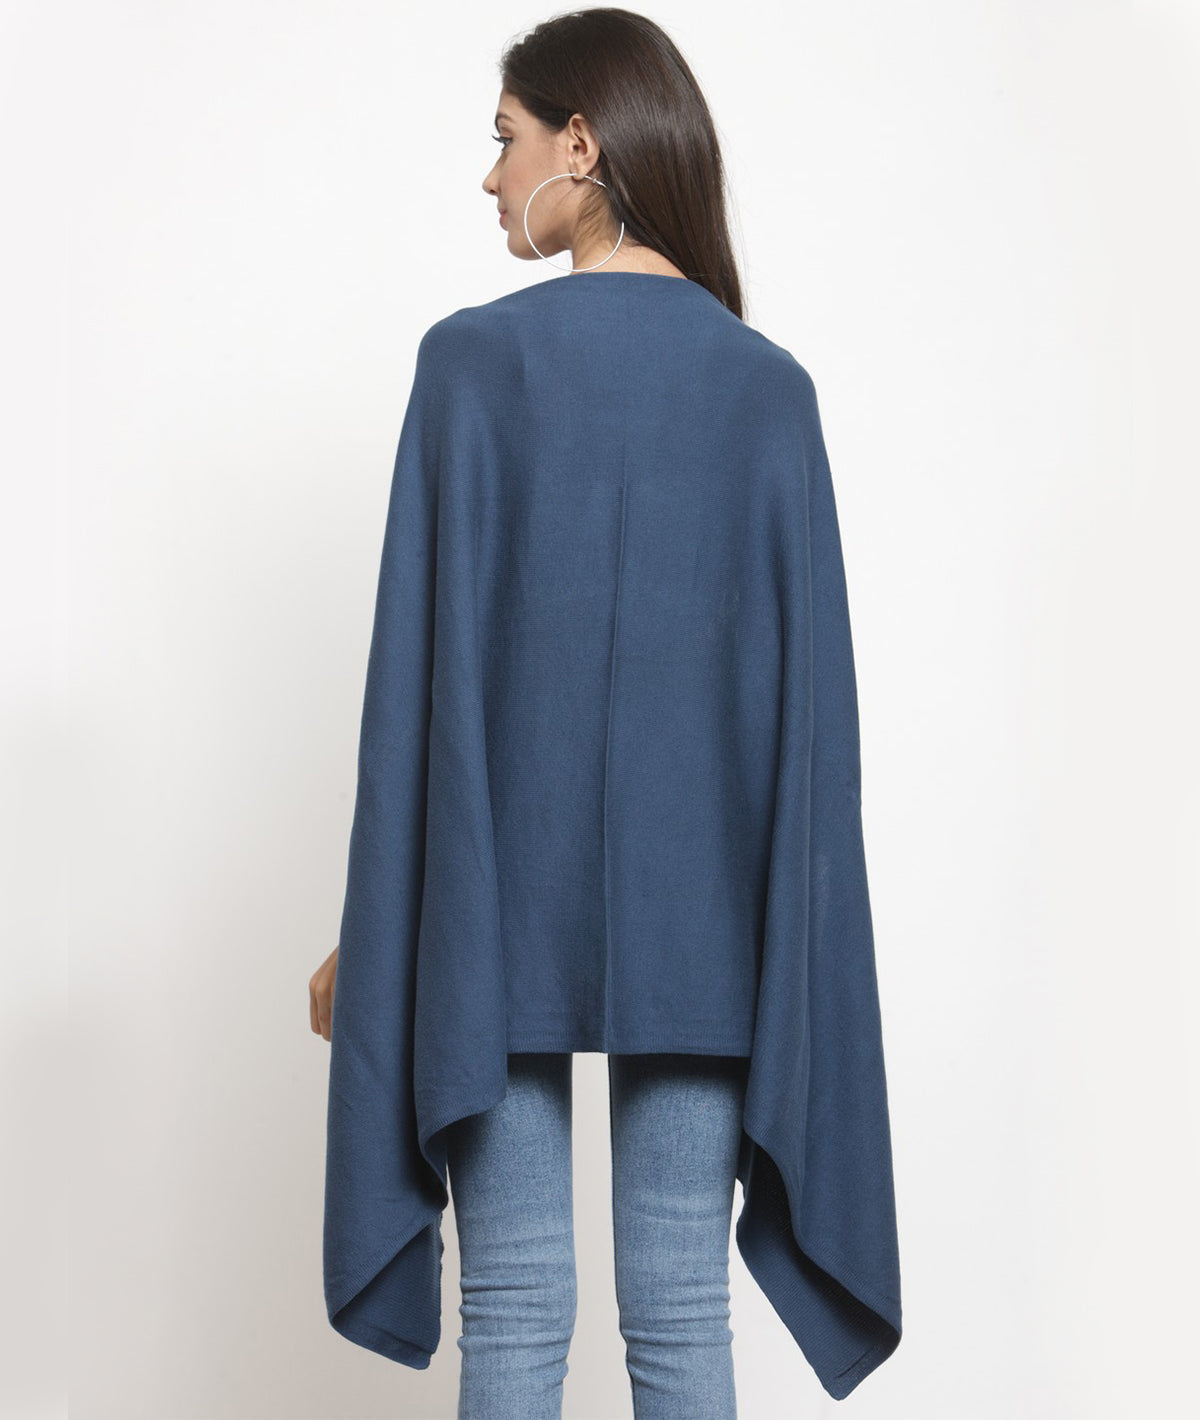 Palma Knitted Cotton Fashion Poncho / Top / Cape in Egyptian Blue Color for Everyday Chic Look (One Size Fits All)